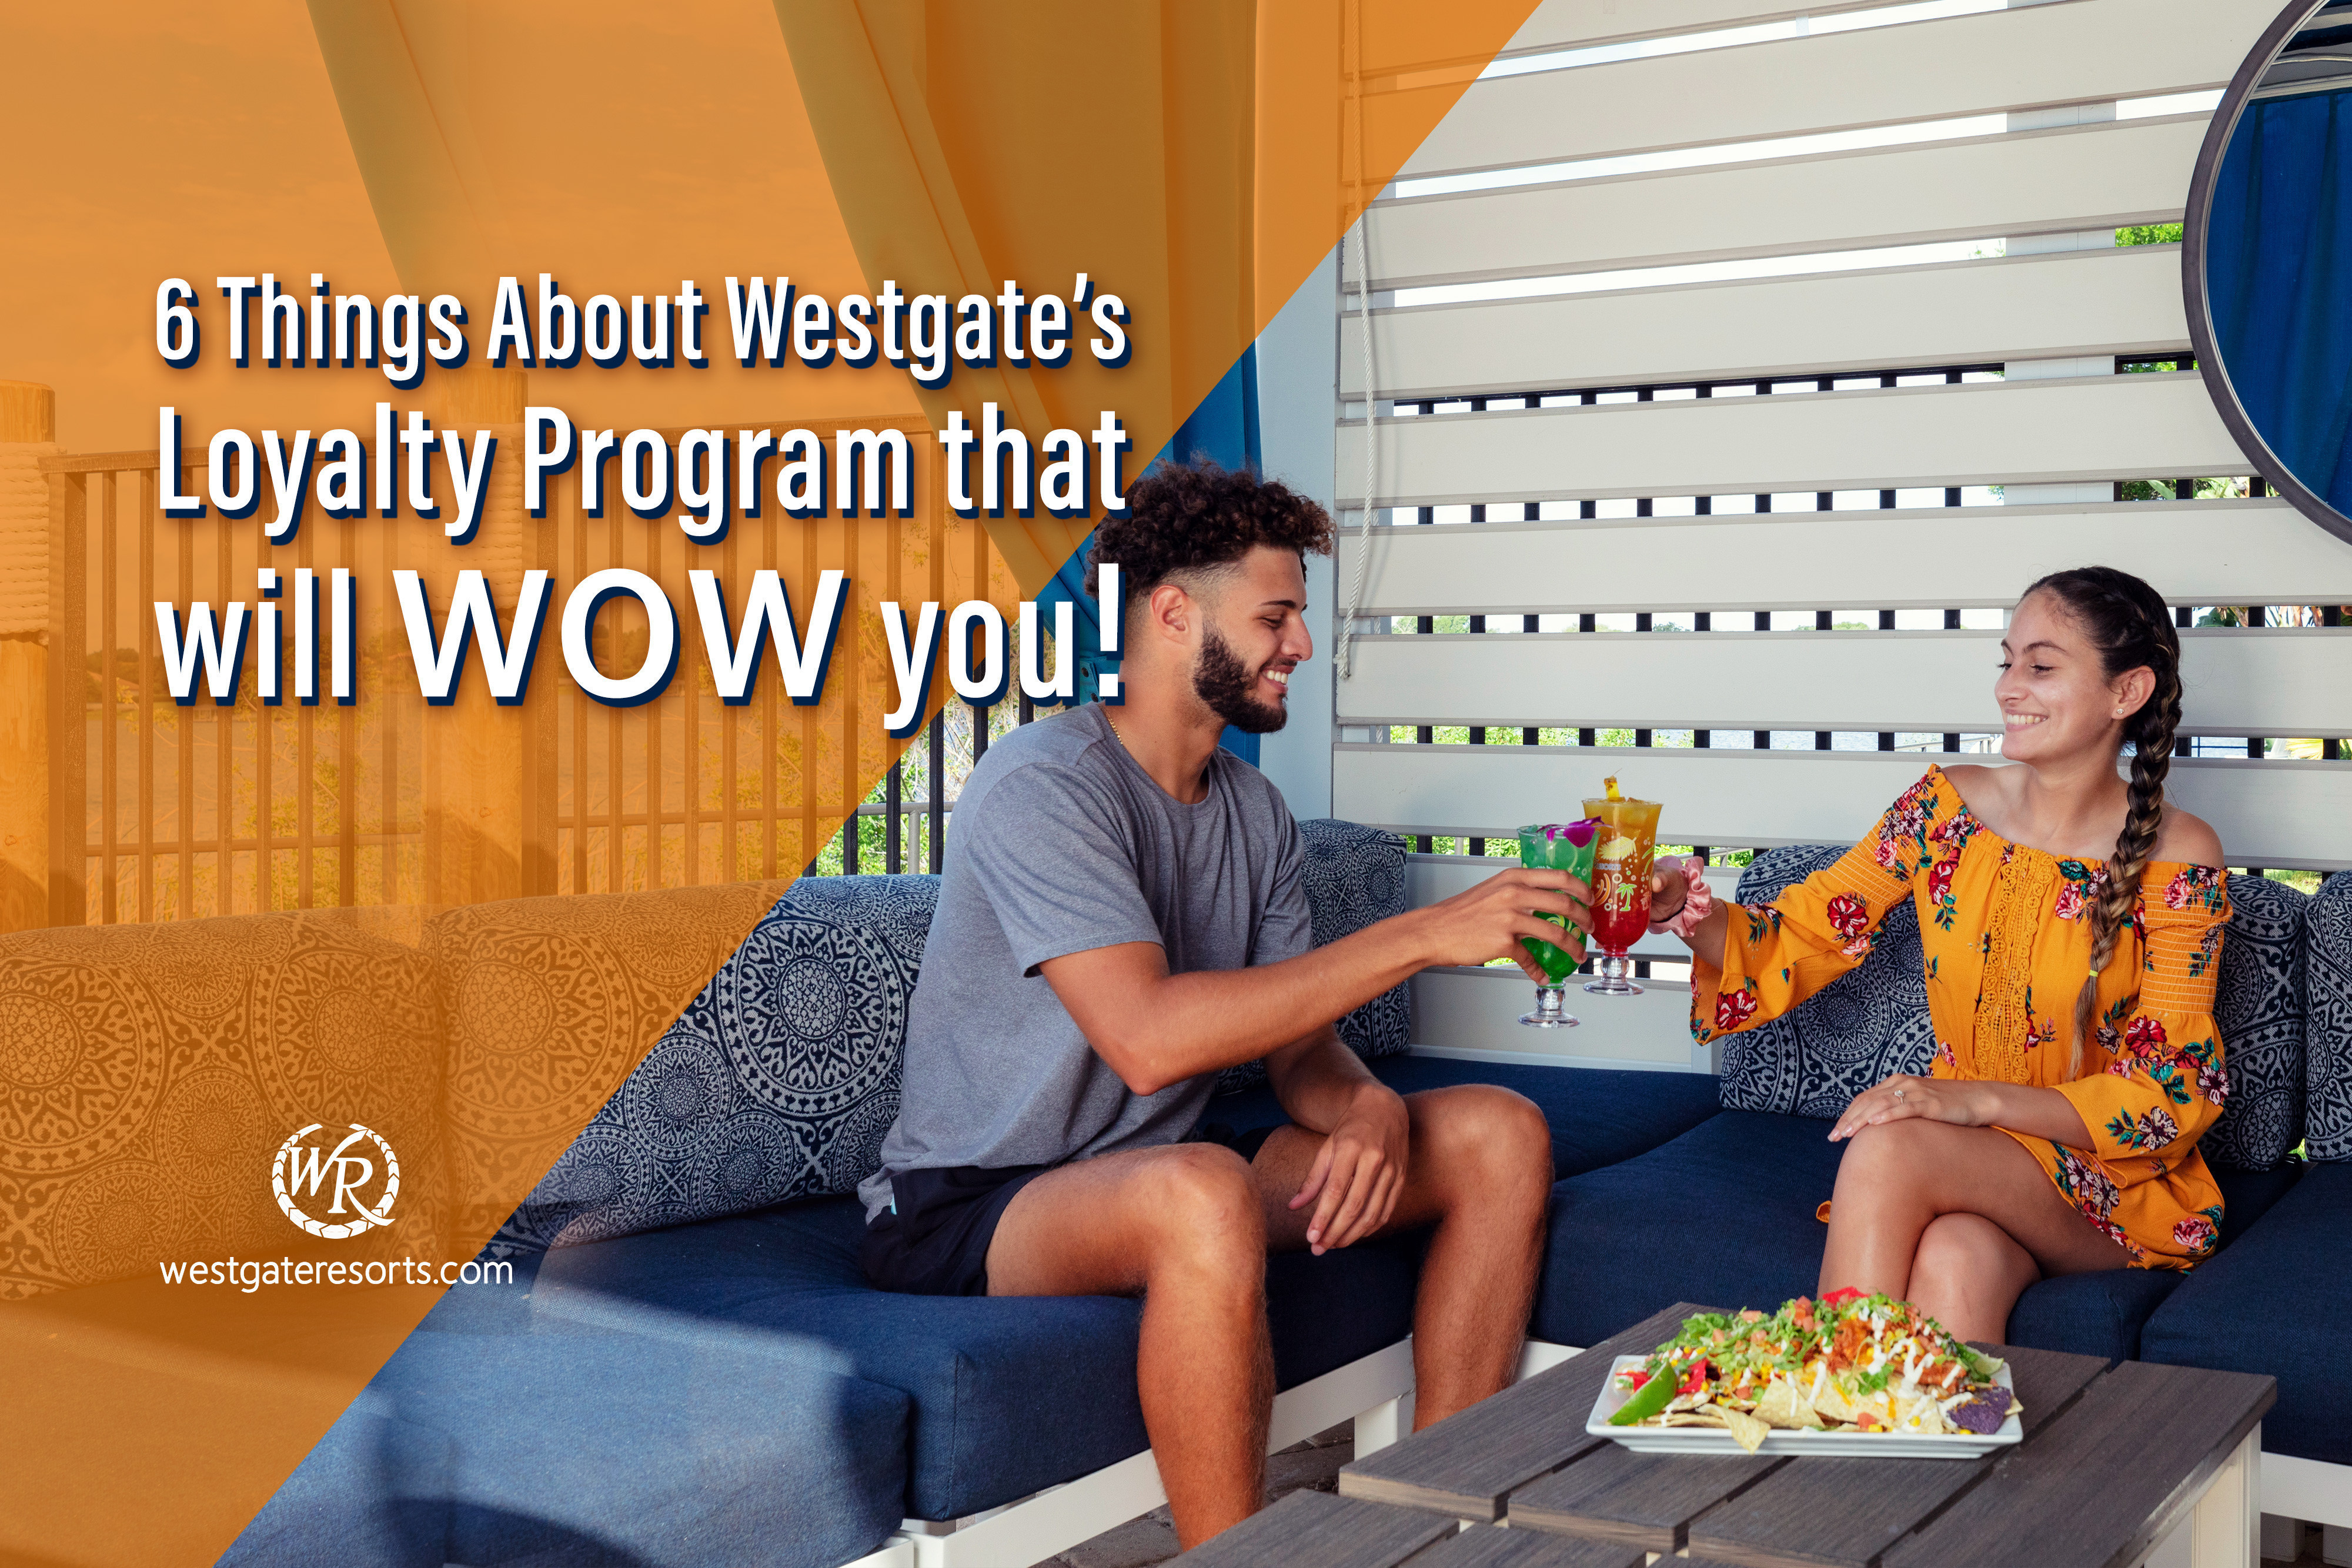 6 Things About Westgate’s Loyalty Program That Will WOW You!